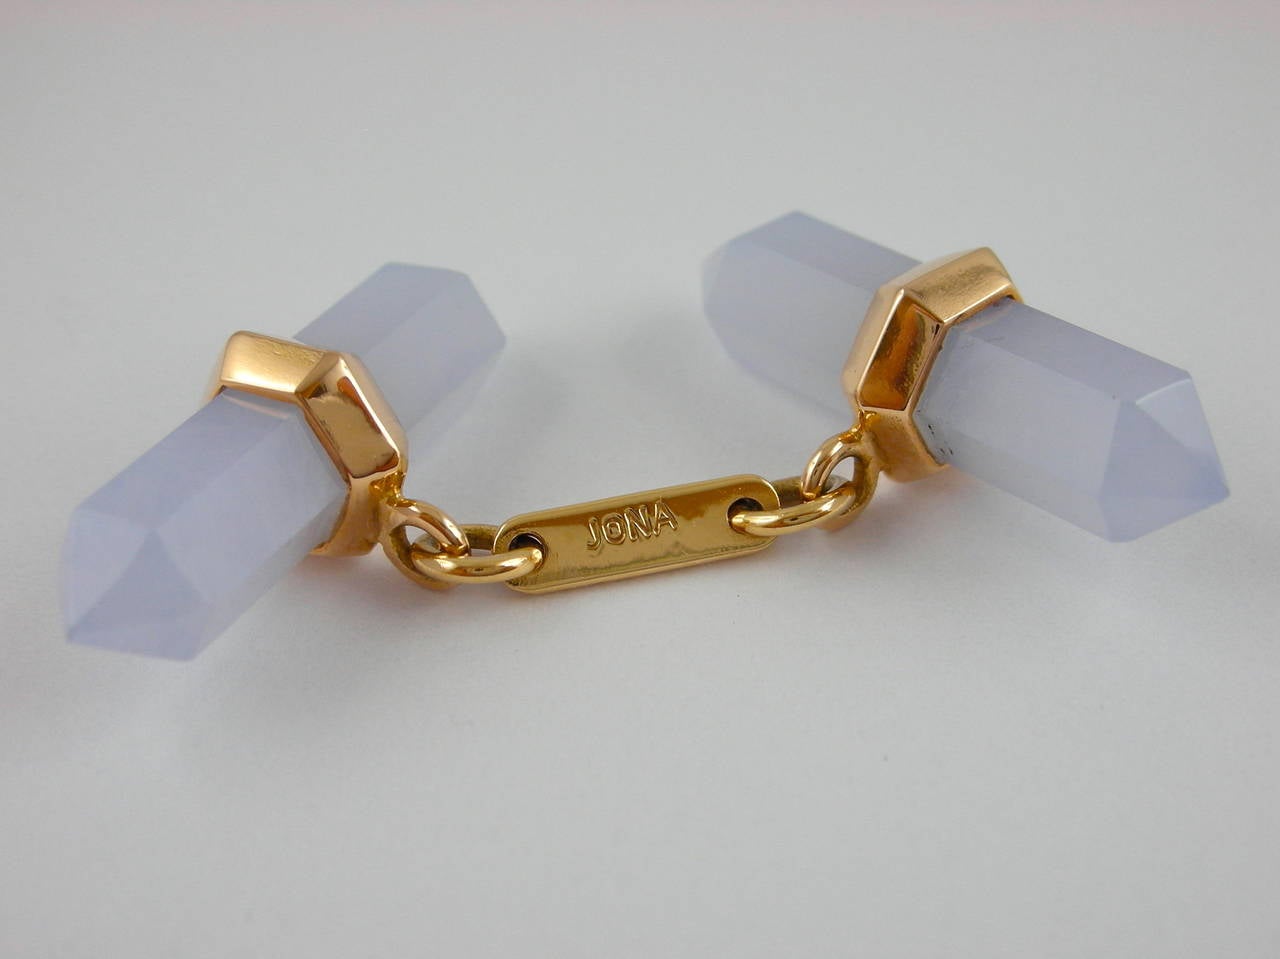 Jona design collection, hand crafted in Italy, Chalcedony prism bar cufflinks mounted in 18 karat rose gold. The gold cufflinks are 